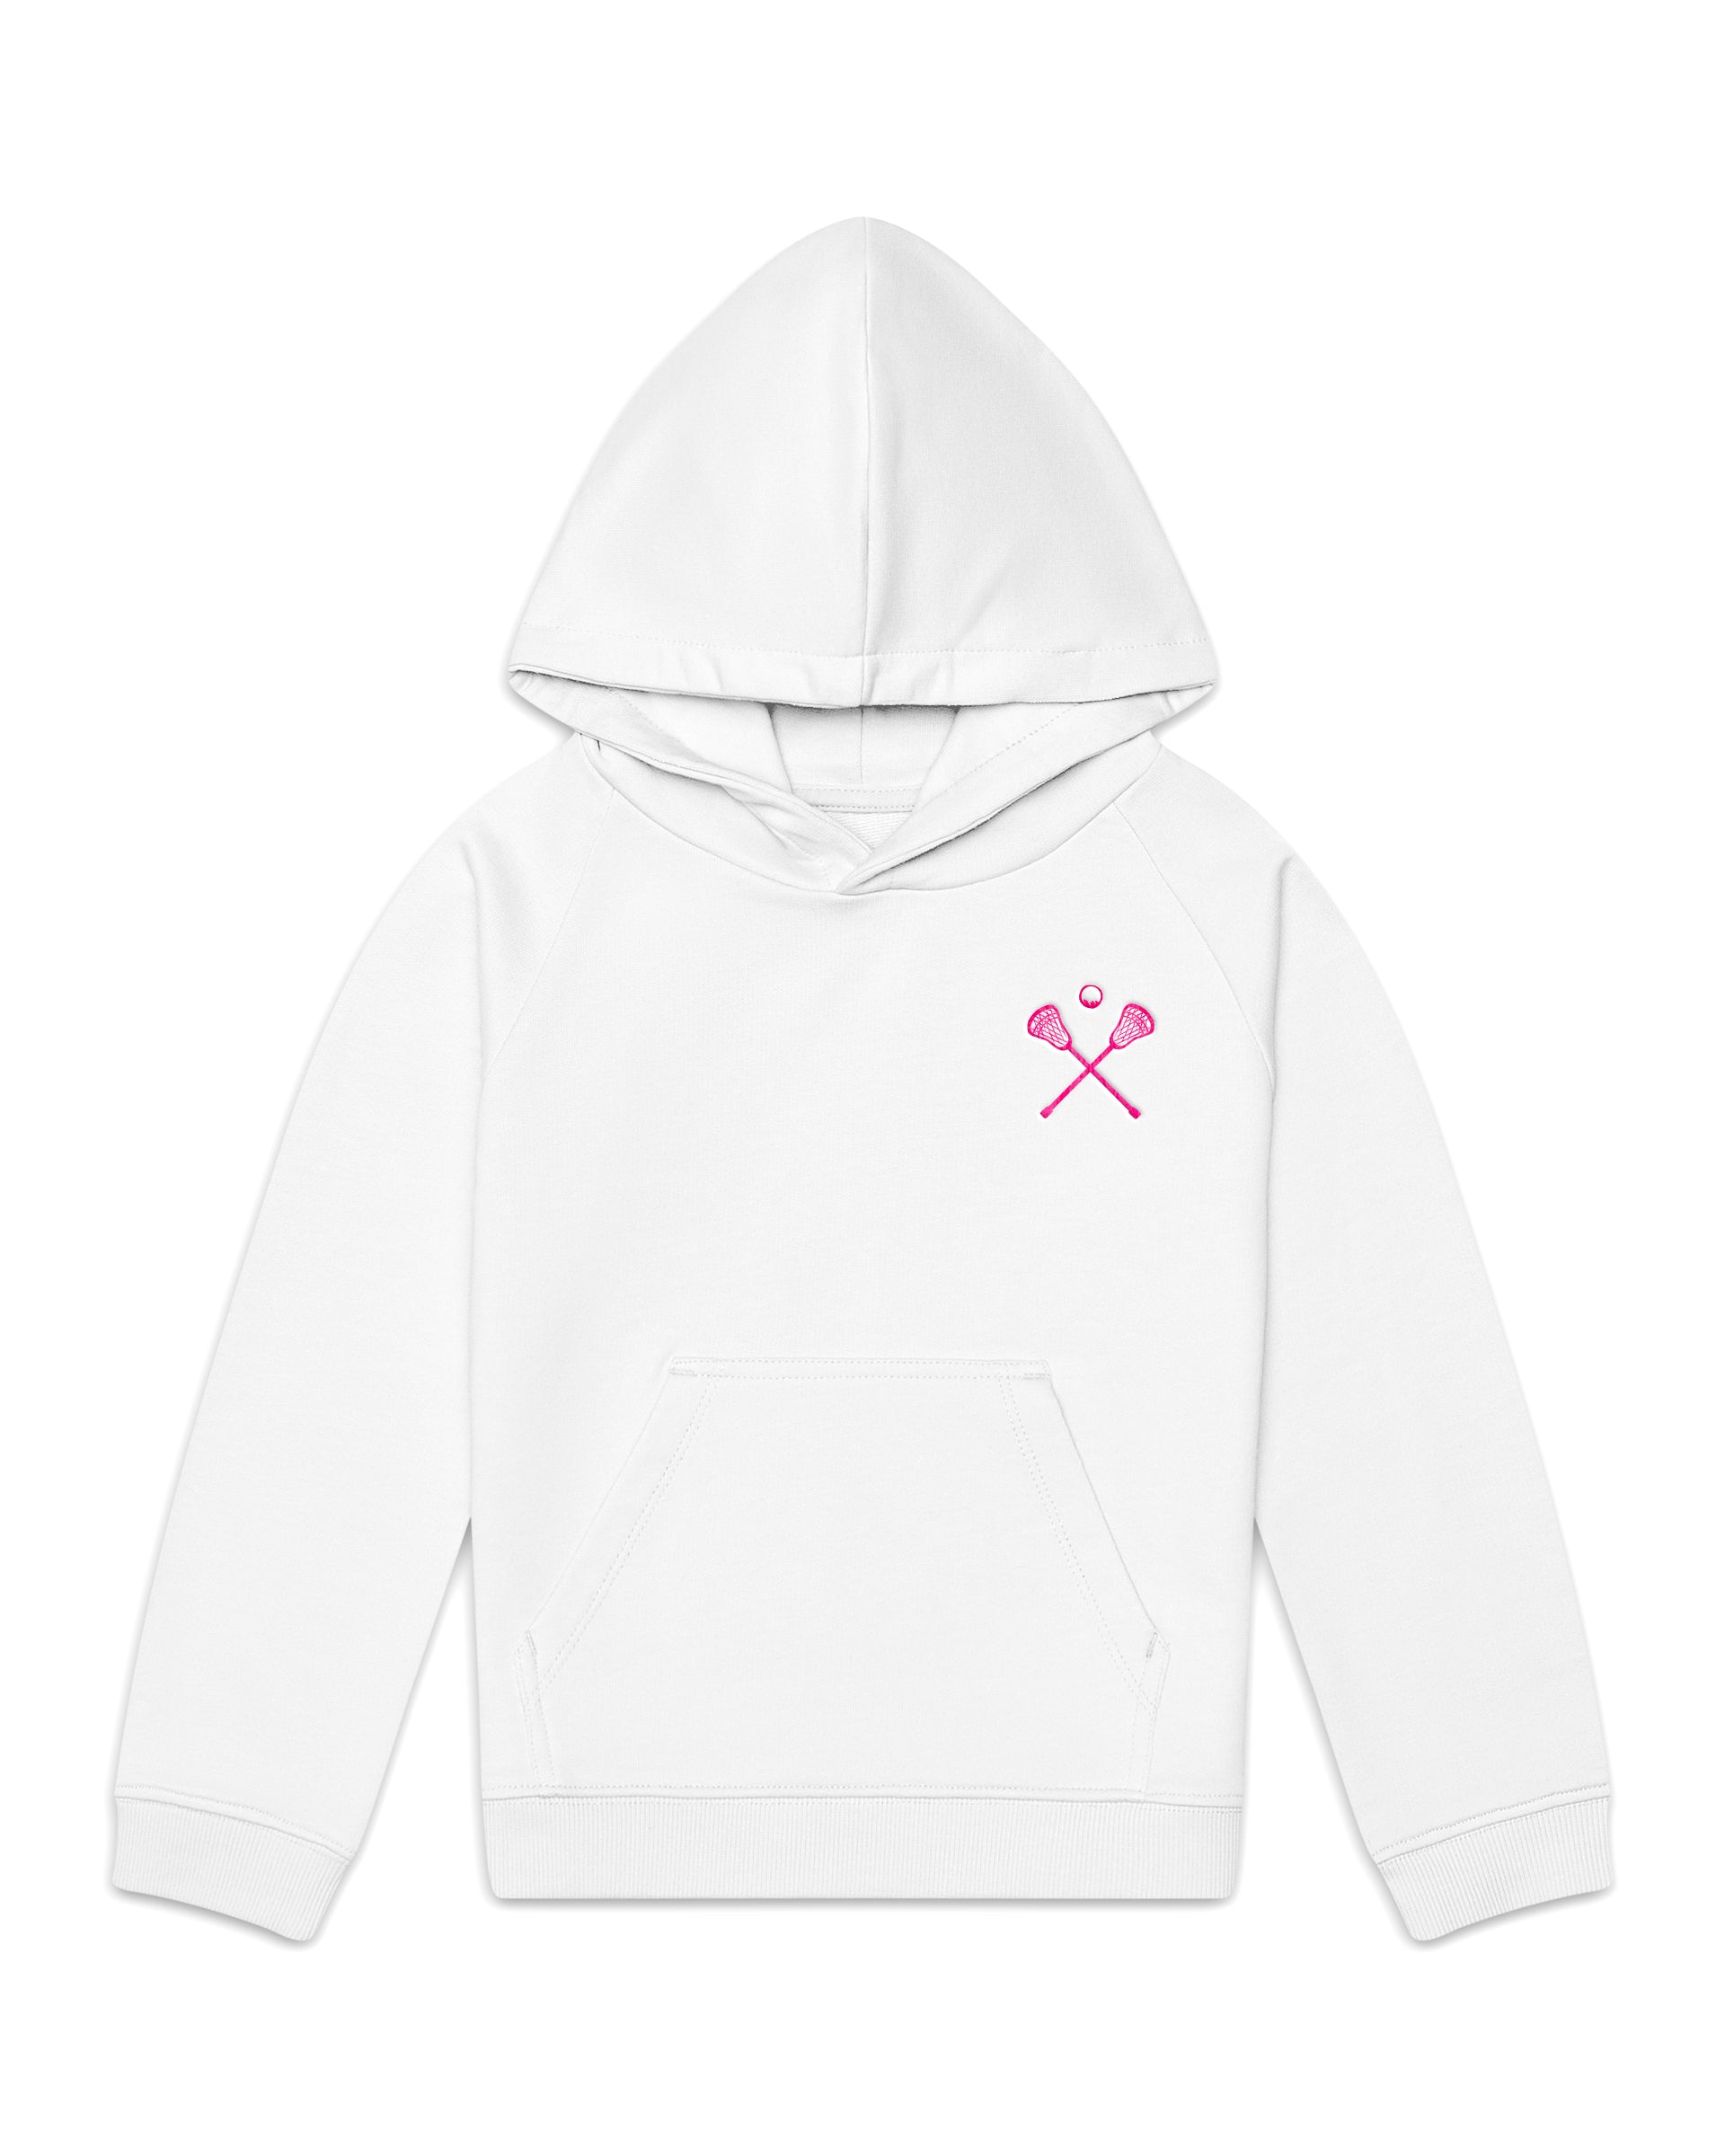 The Organic Embroidered Hoodie Sweatshirt [White with Neon Pink Lacrosse]